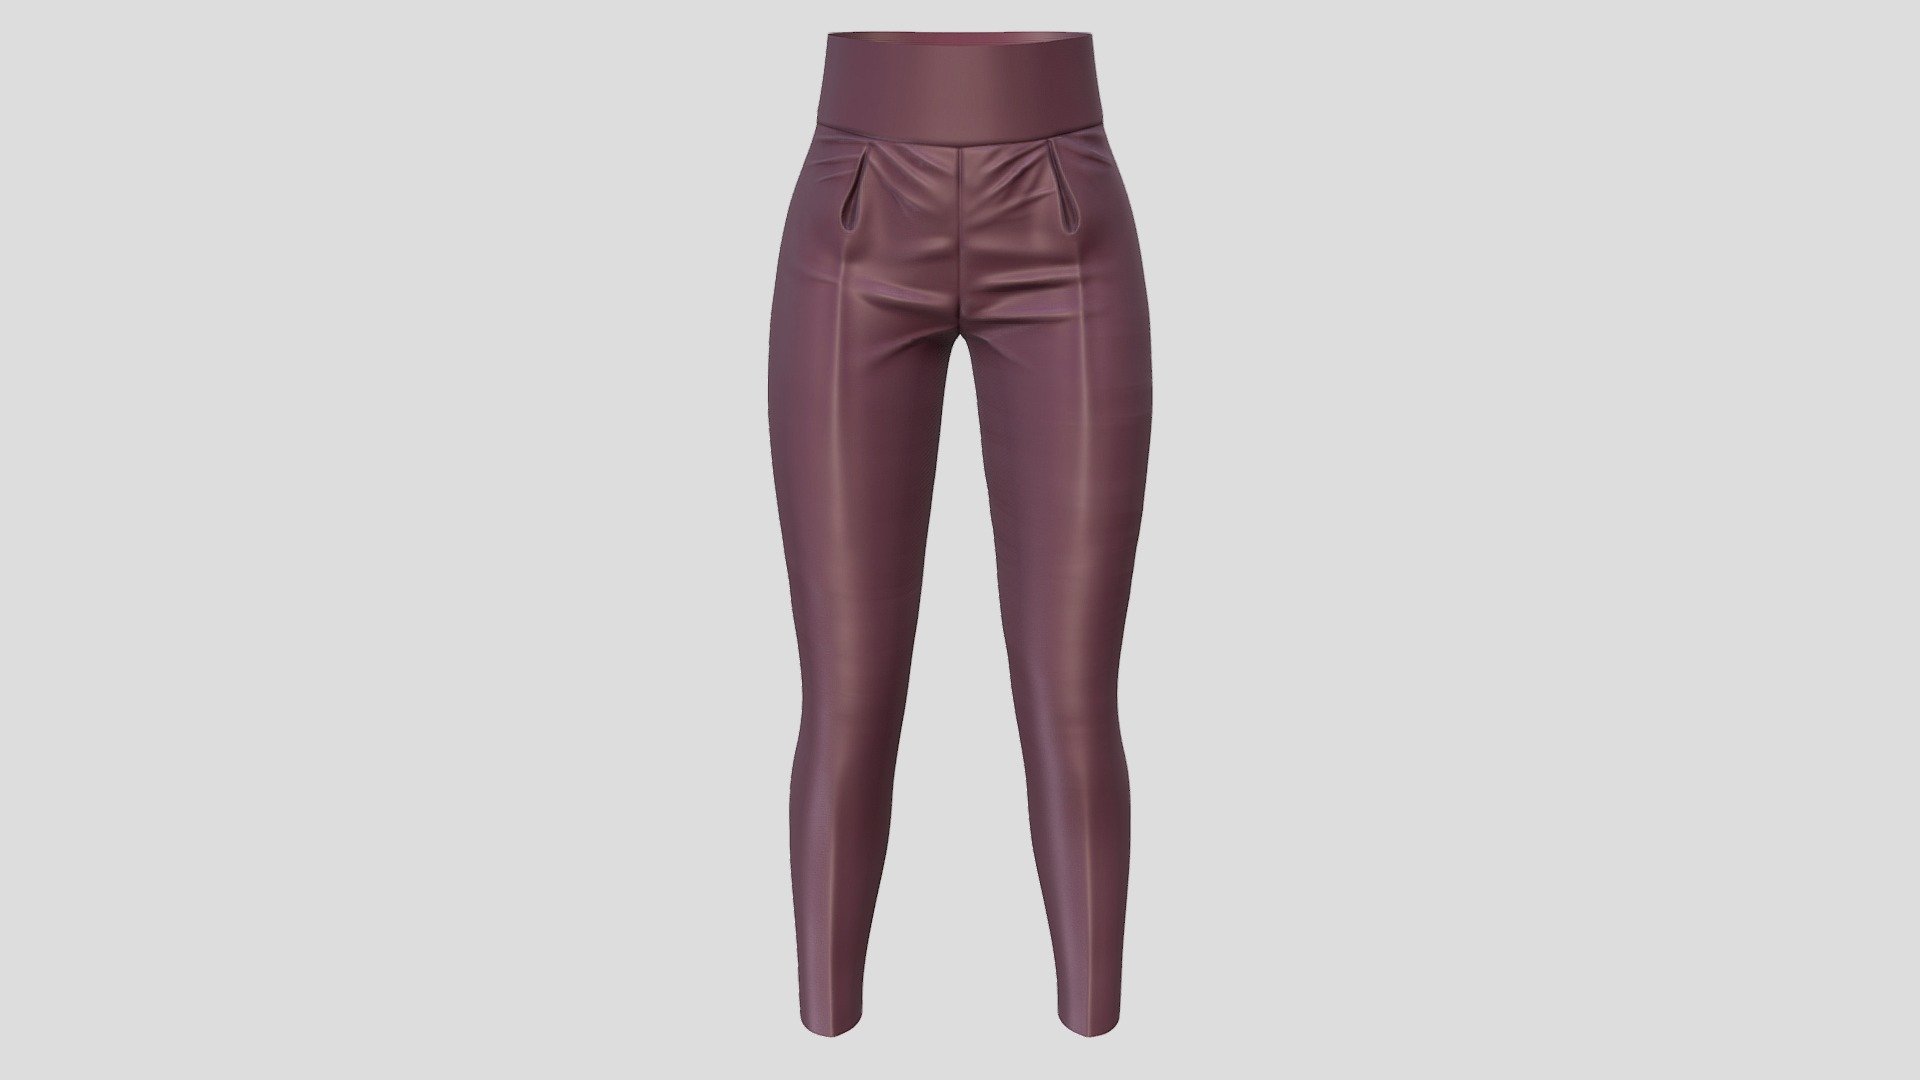 3D model See Through Body Effect Sheer Top and Maroon Shiny Leather Pants  VR / AR / low-poly